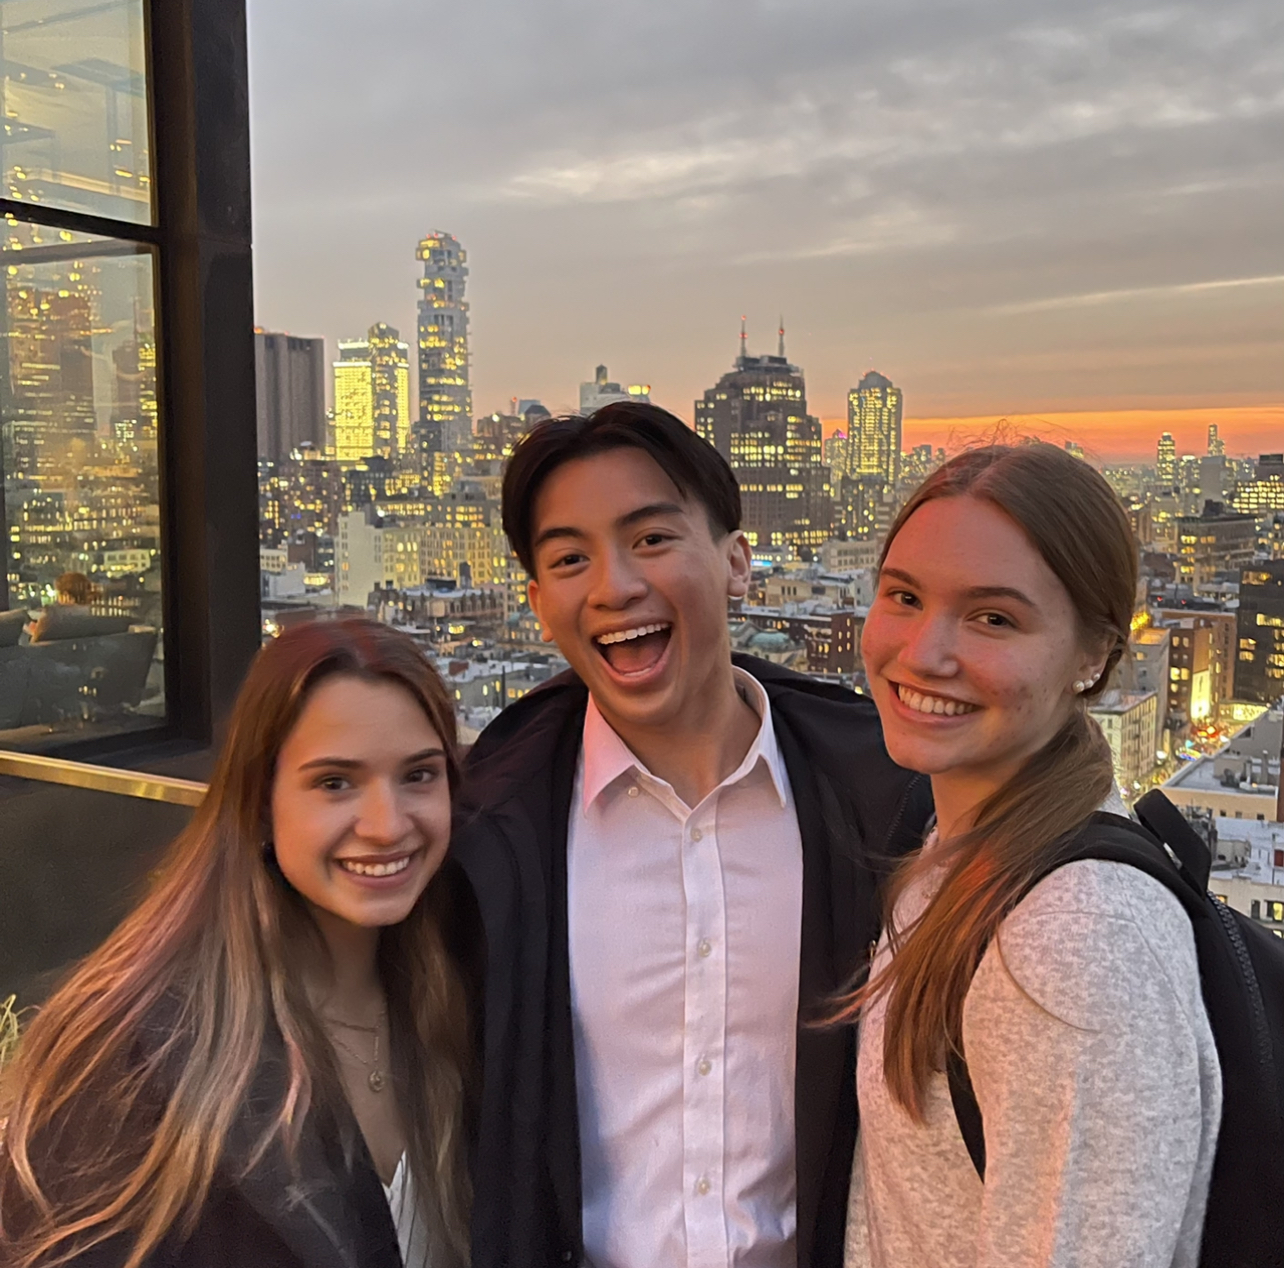 The author at a hotel with two friends. The New York City skyline is behind them.